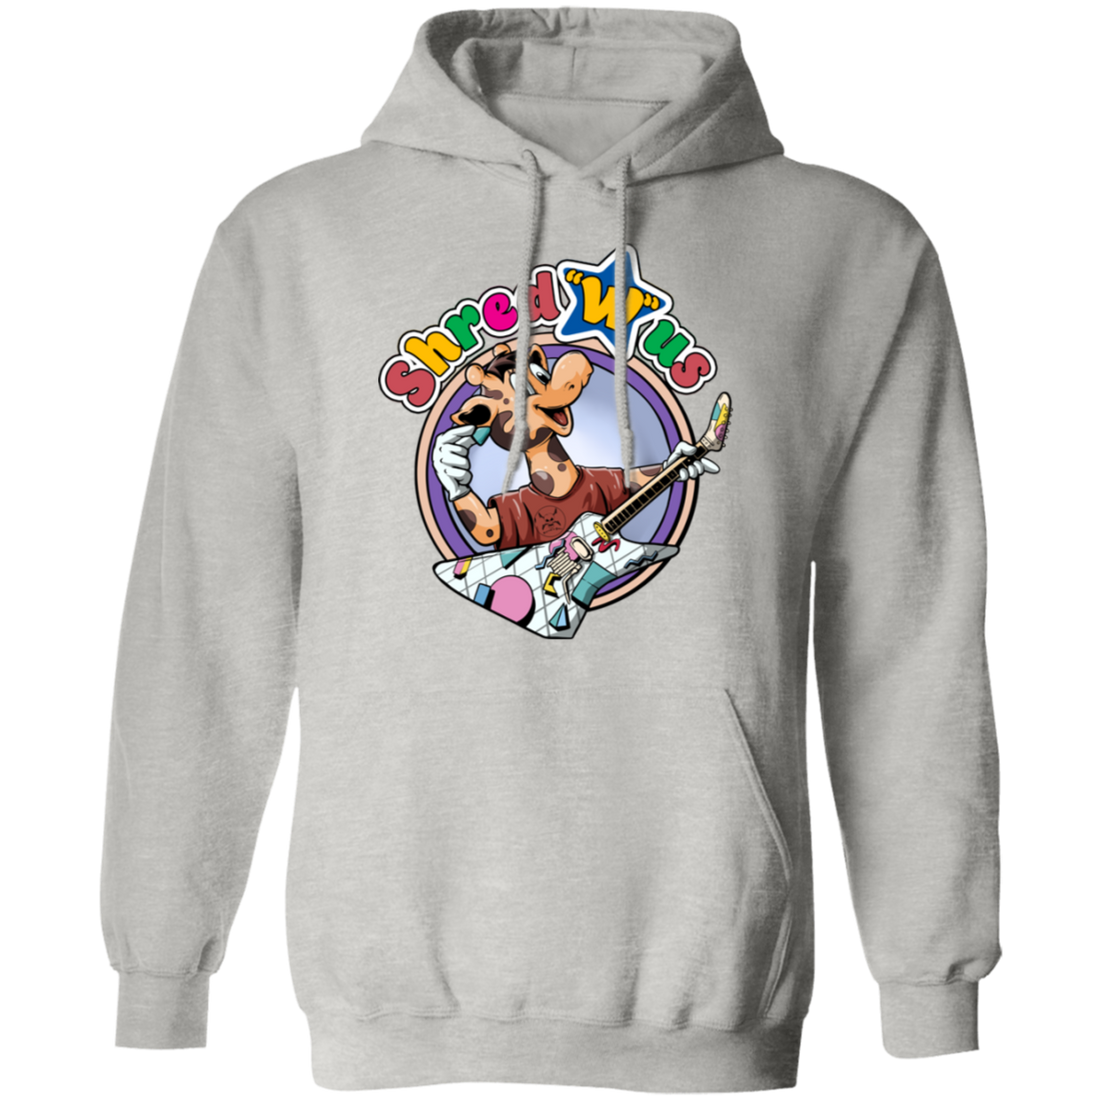 Shred With Us Pullover Hoodie